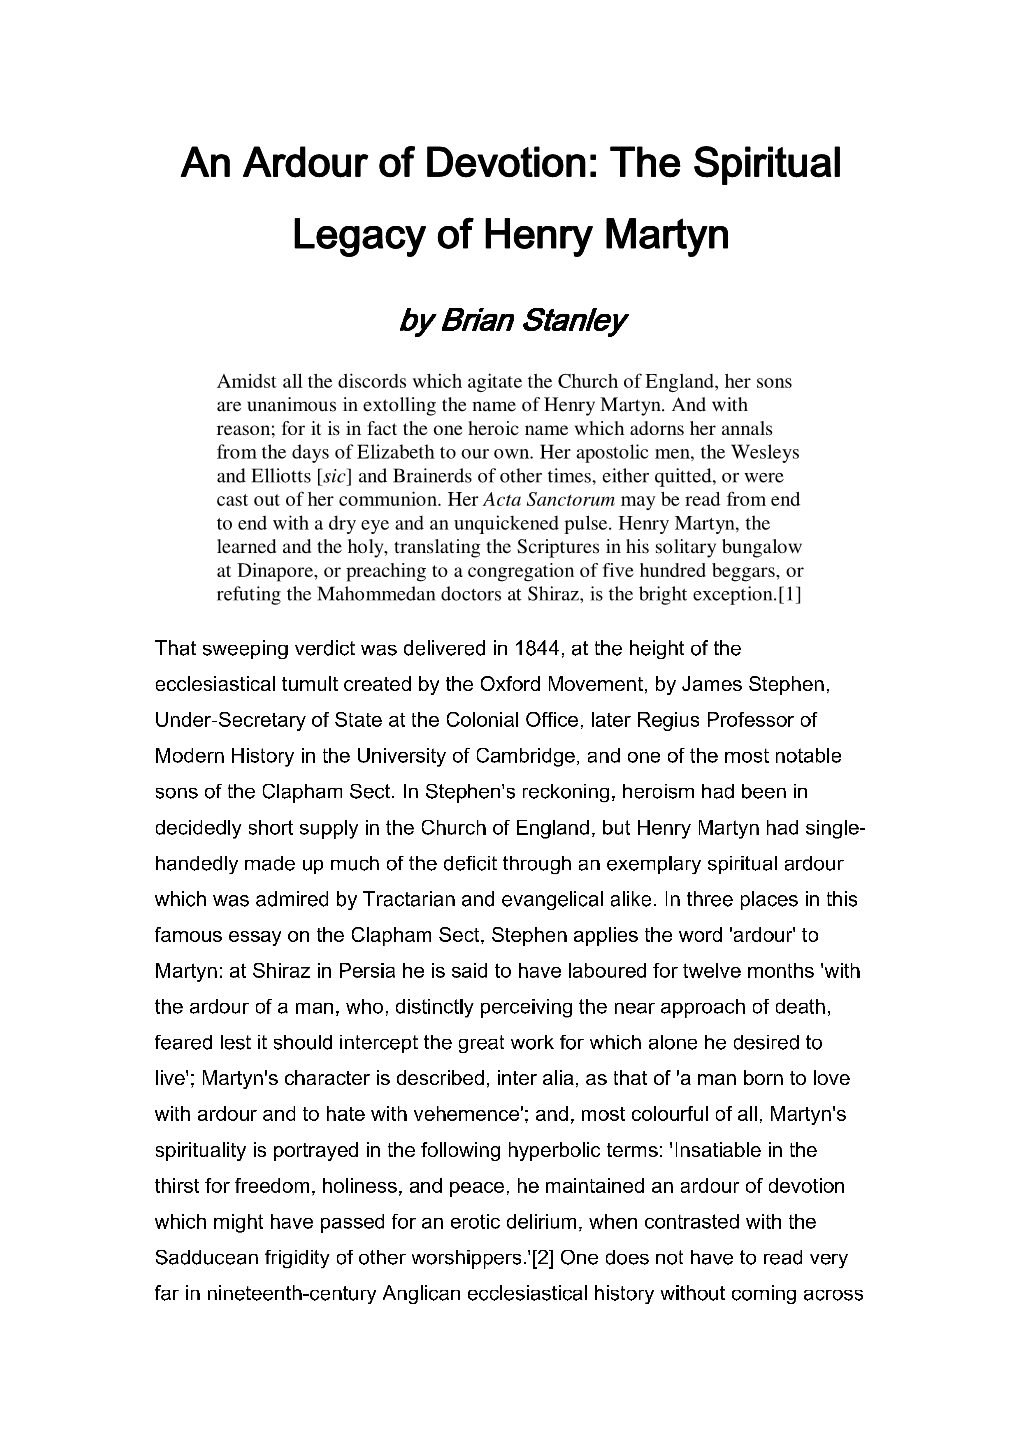 An Ardour of Devotion: the Spiritual Legacy of Henry Martyn Legacy Of